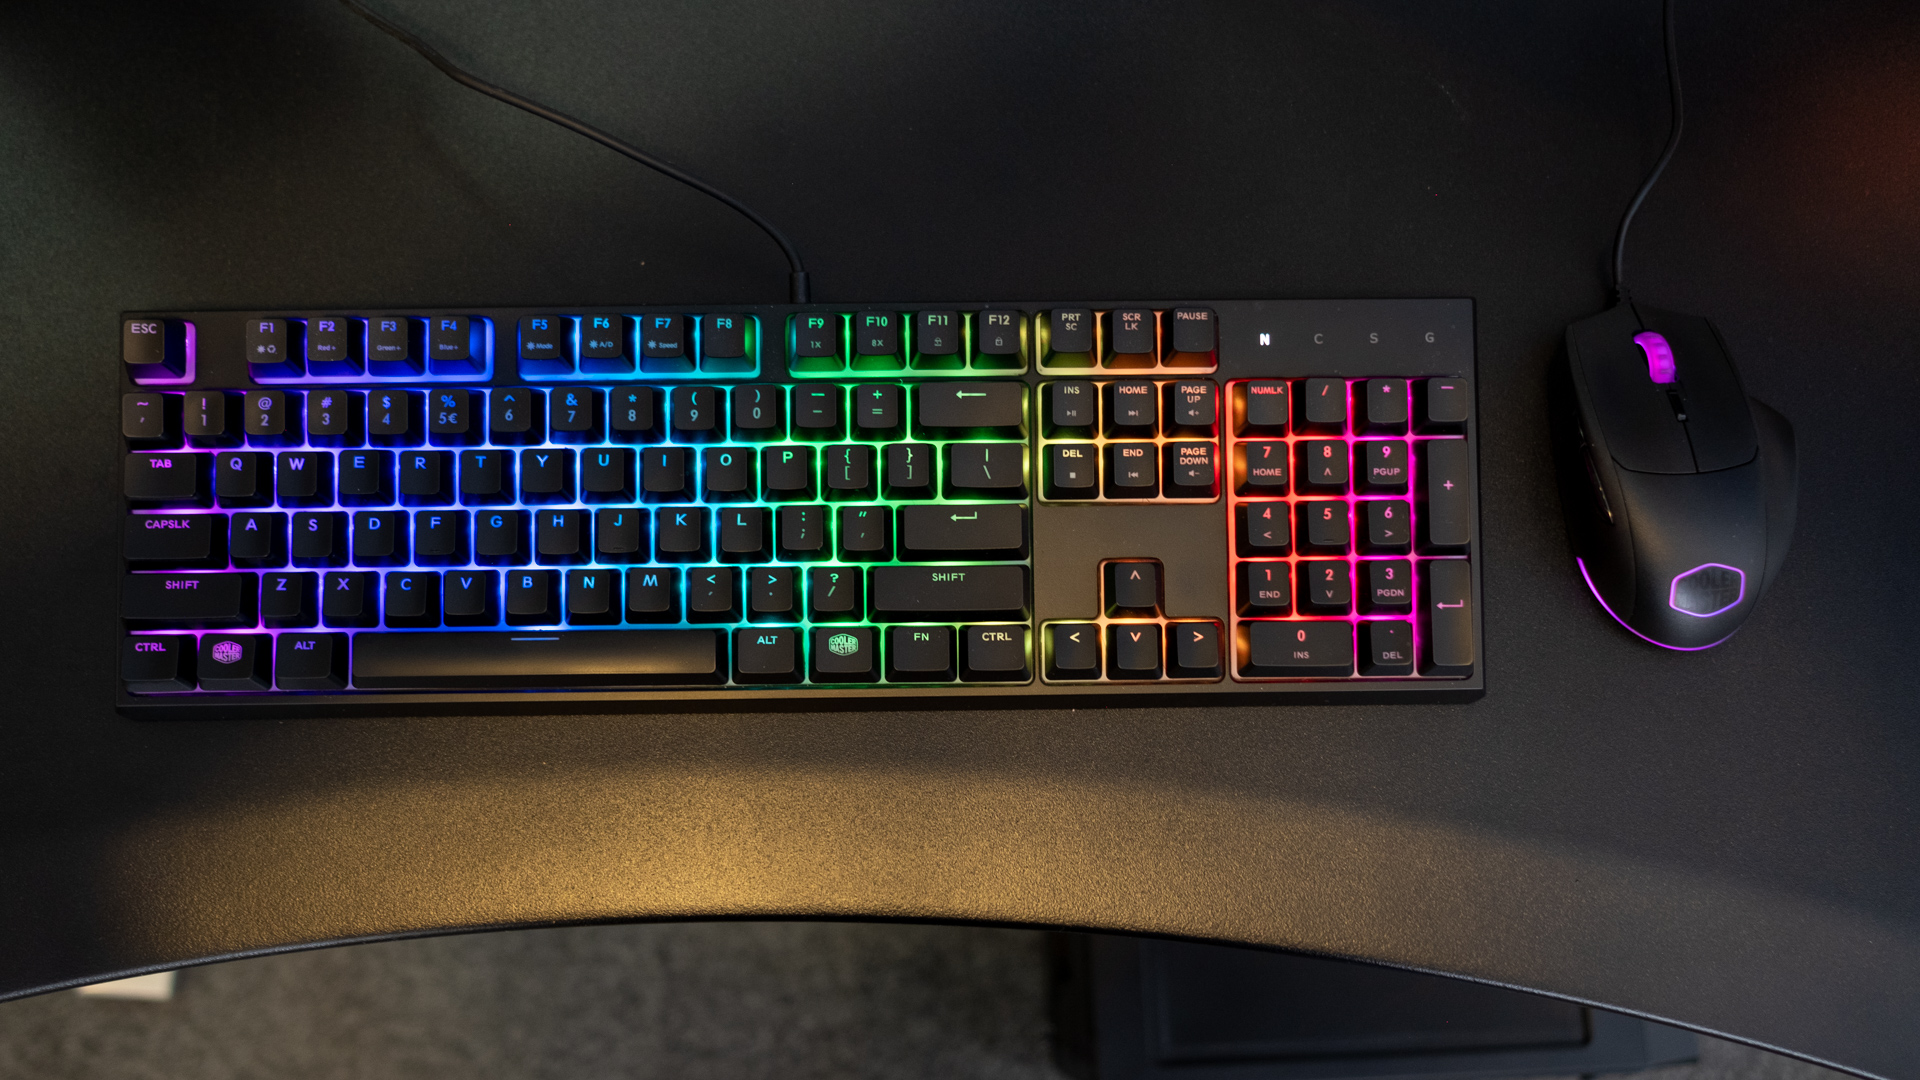 Black keyboard and mouse with colored lighting featuring purple, blue, green, yellow, orange and pink to highlight the keys.